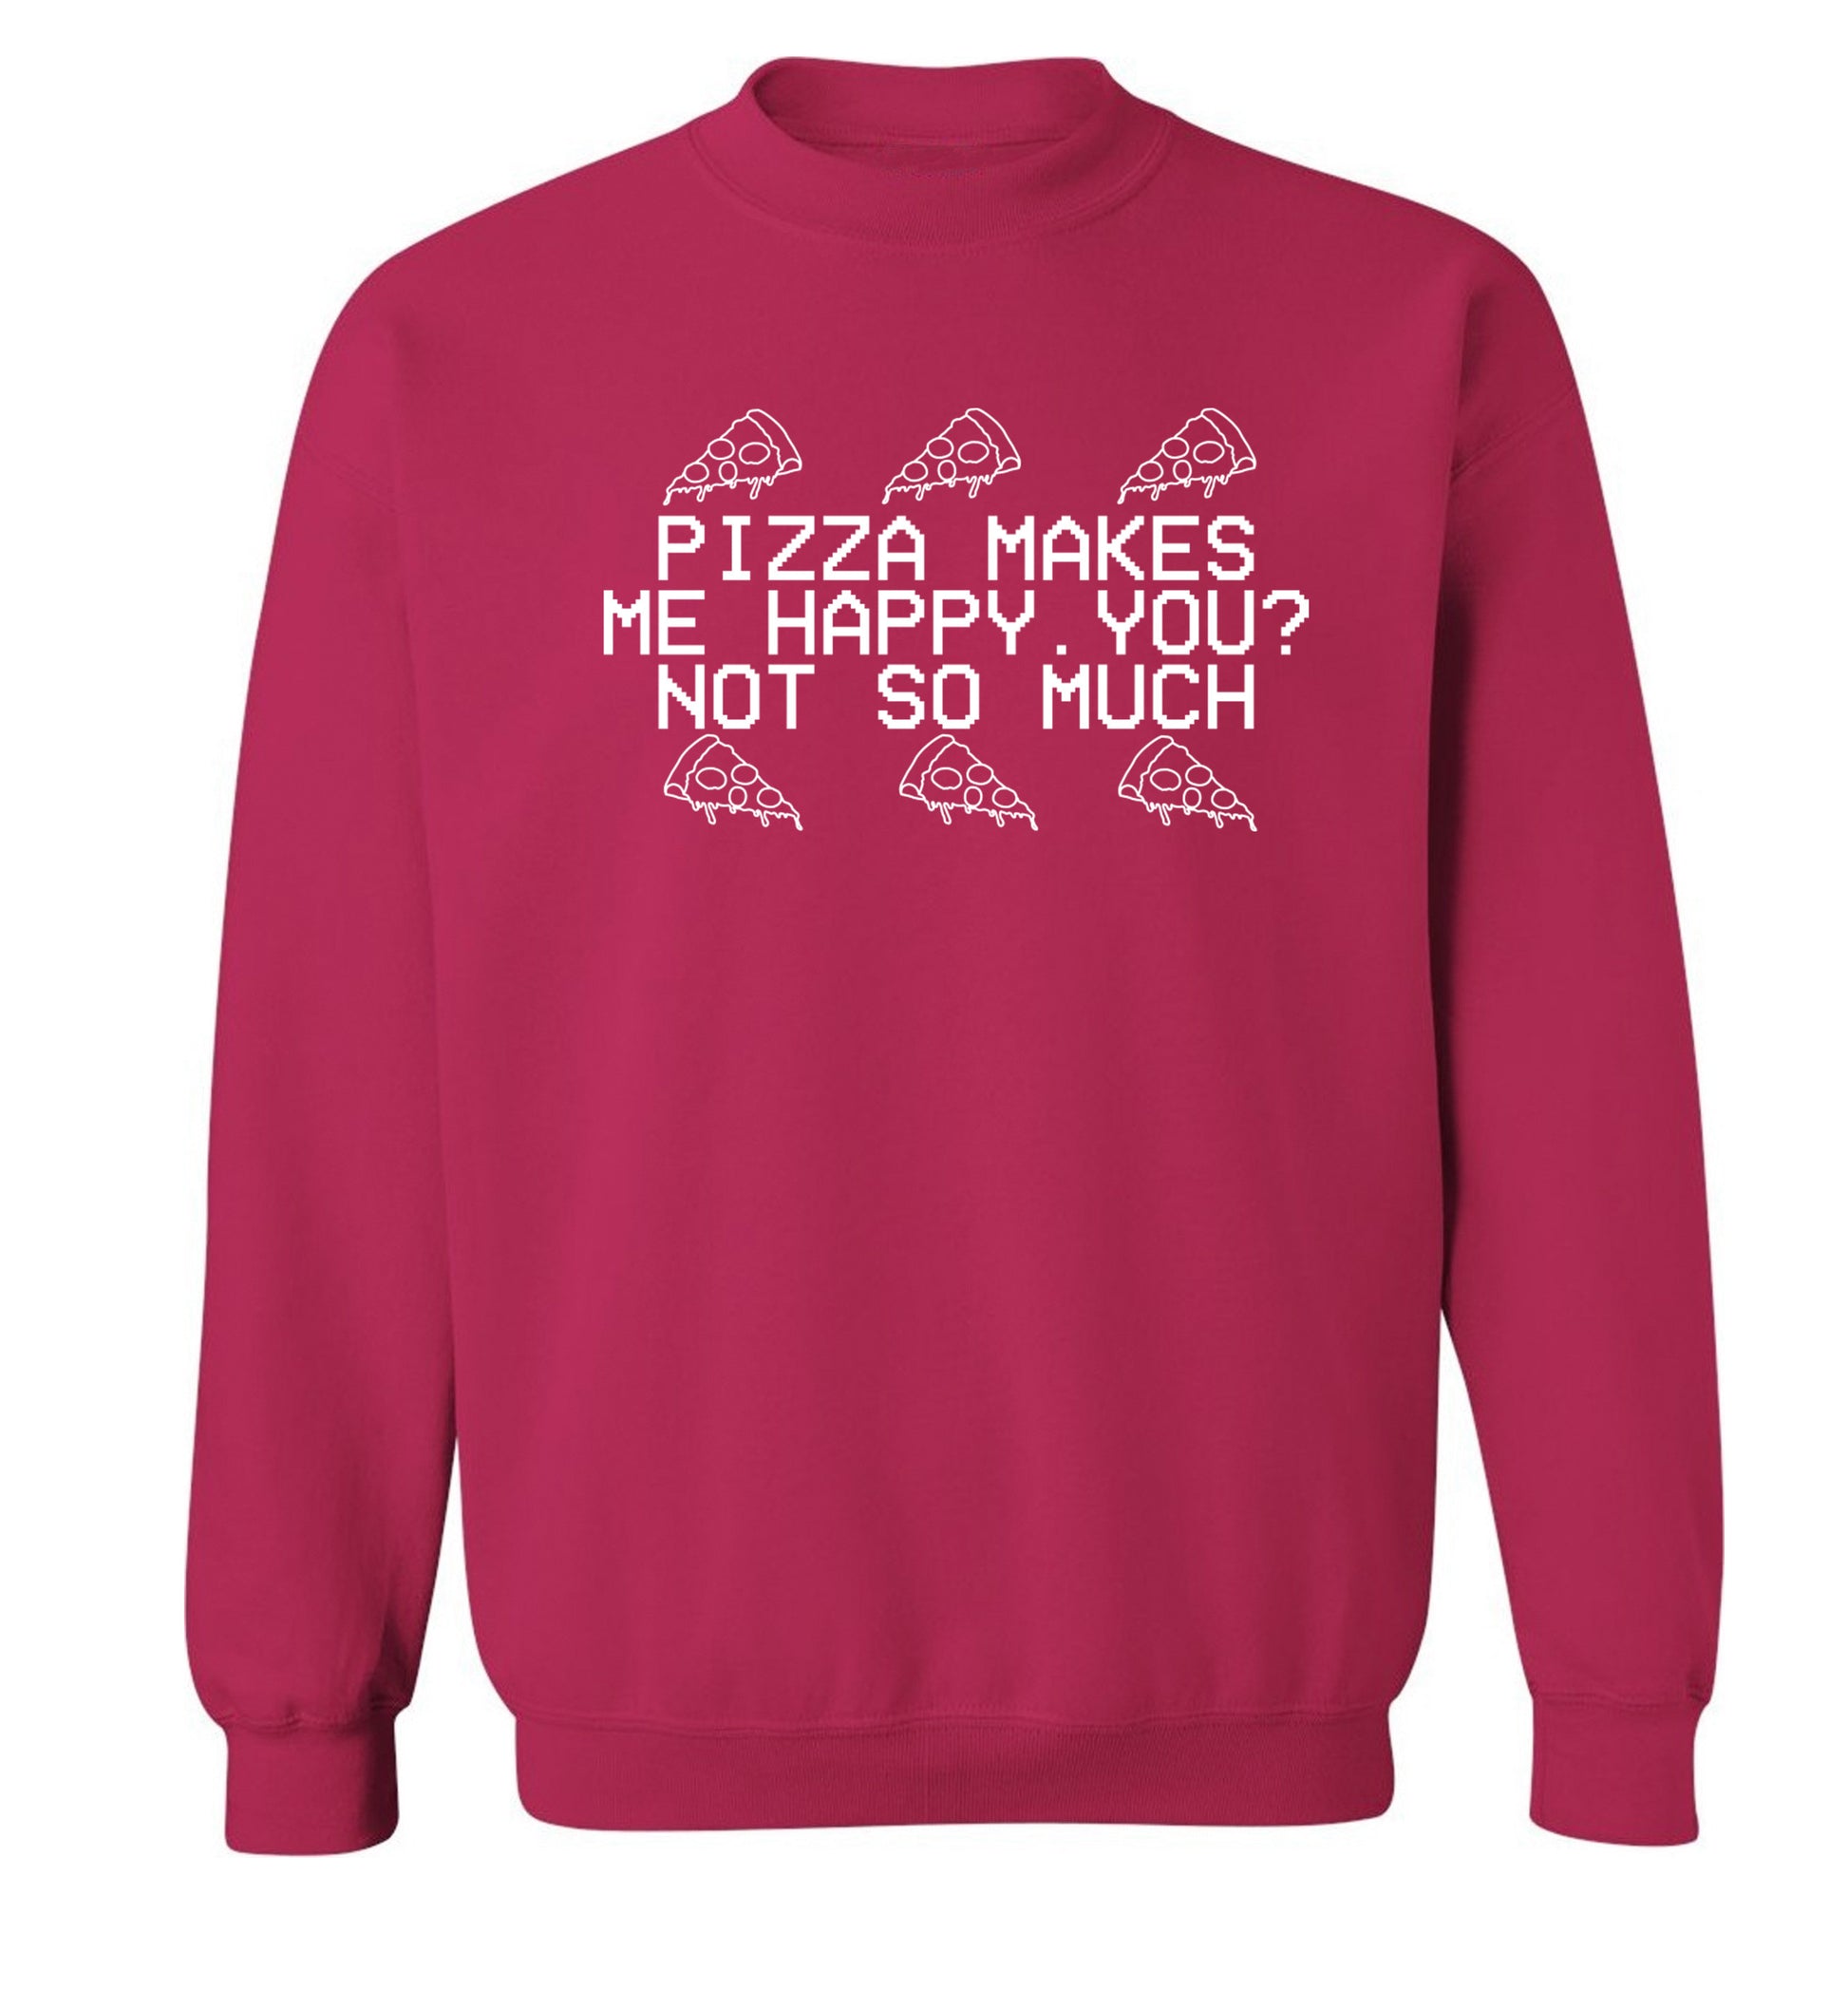 Pizza makes me happy, You? Not so much Adult's unisex pink  sweater XL